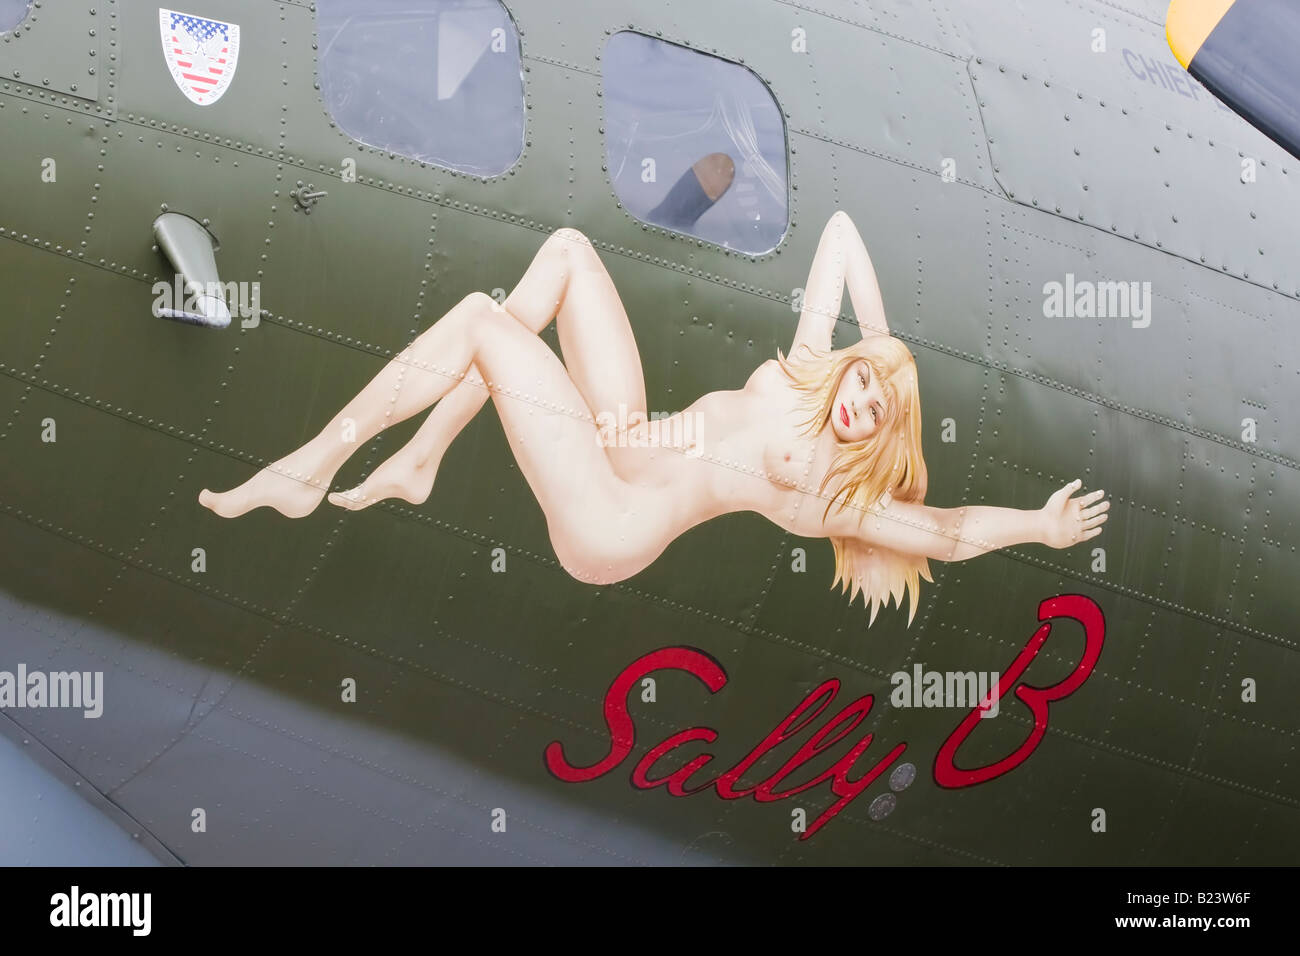 Boeing B17G Flying Fortresss nose art Sally B Stock Photo